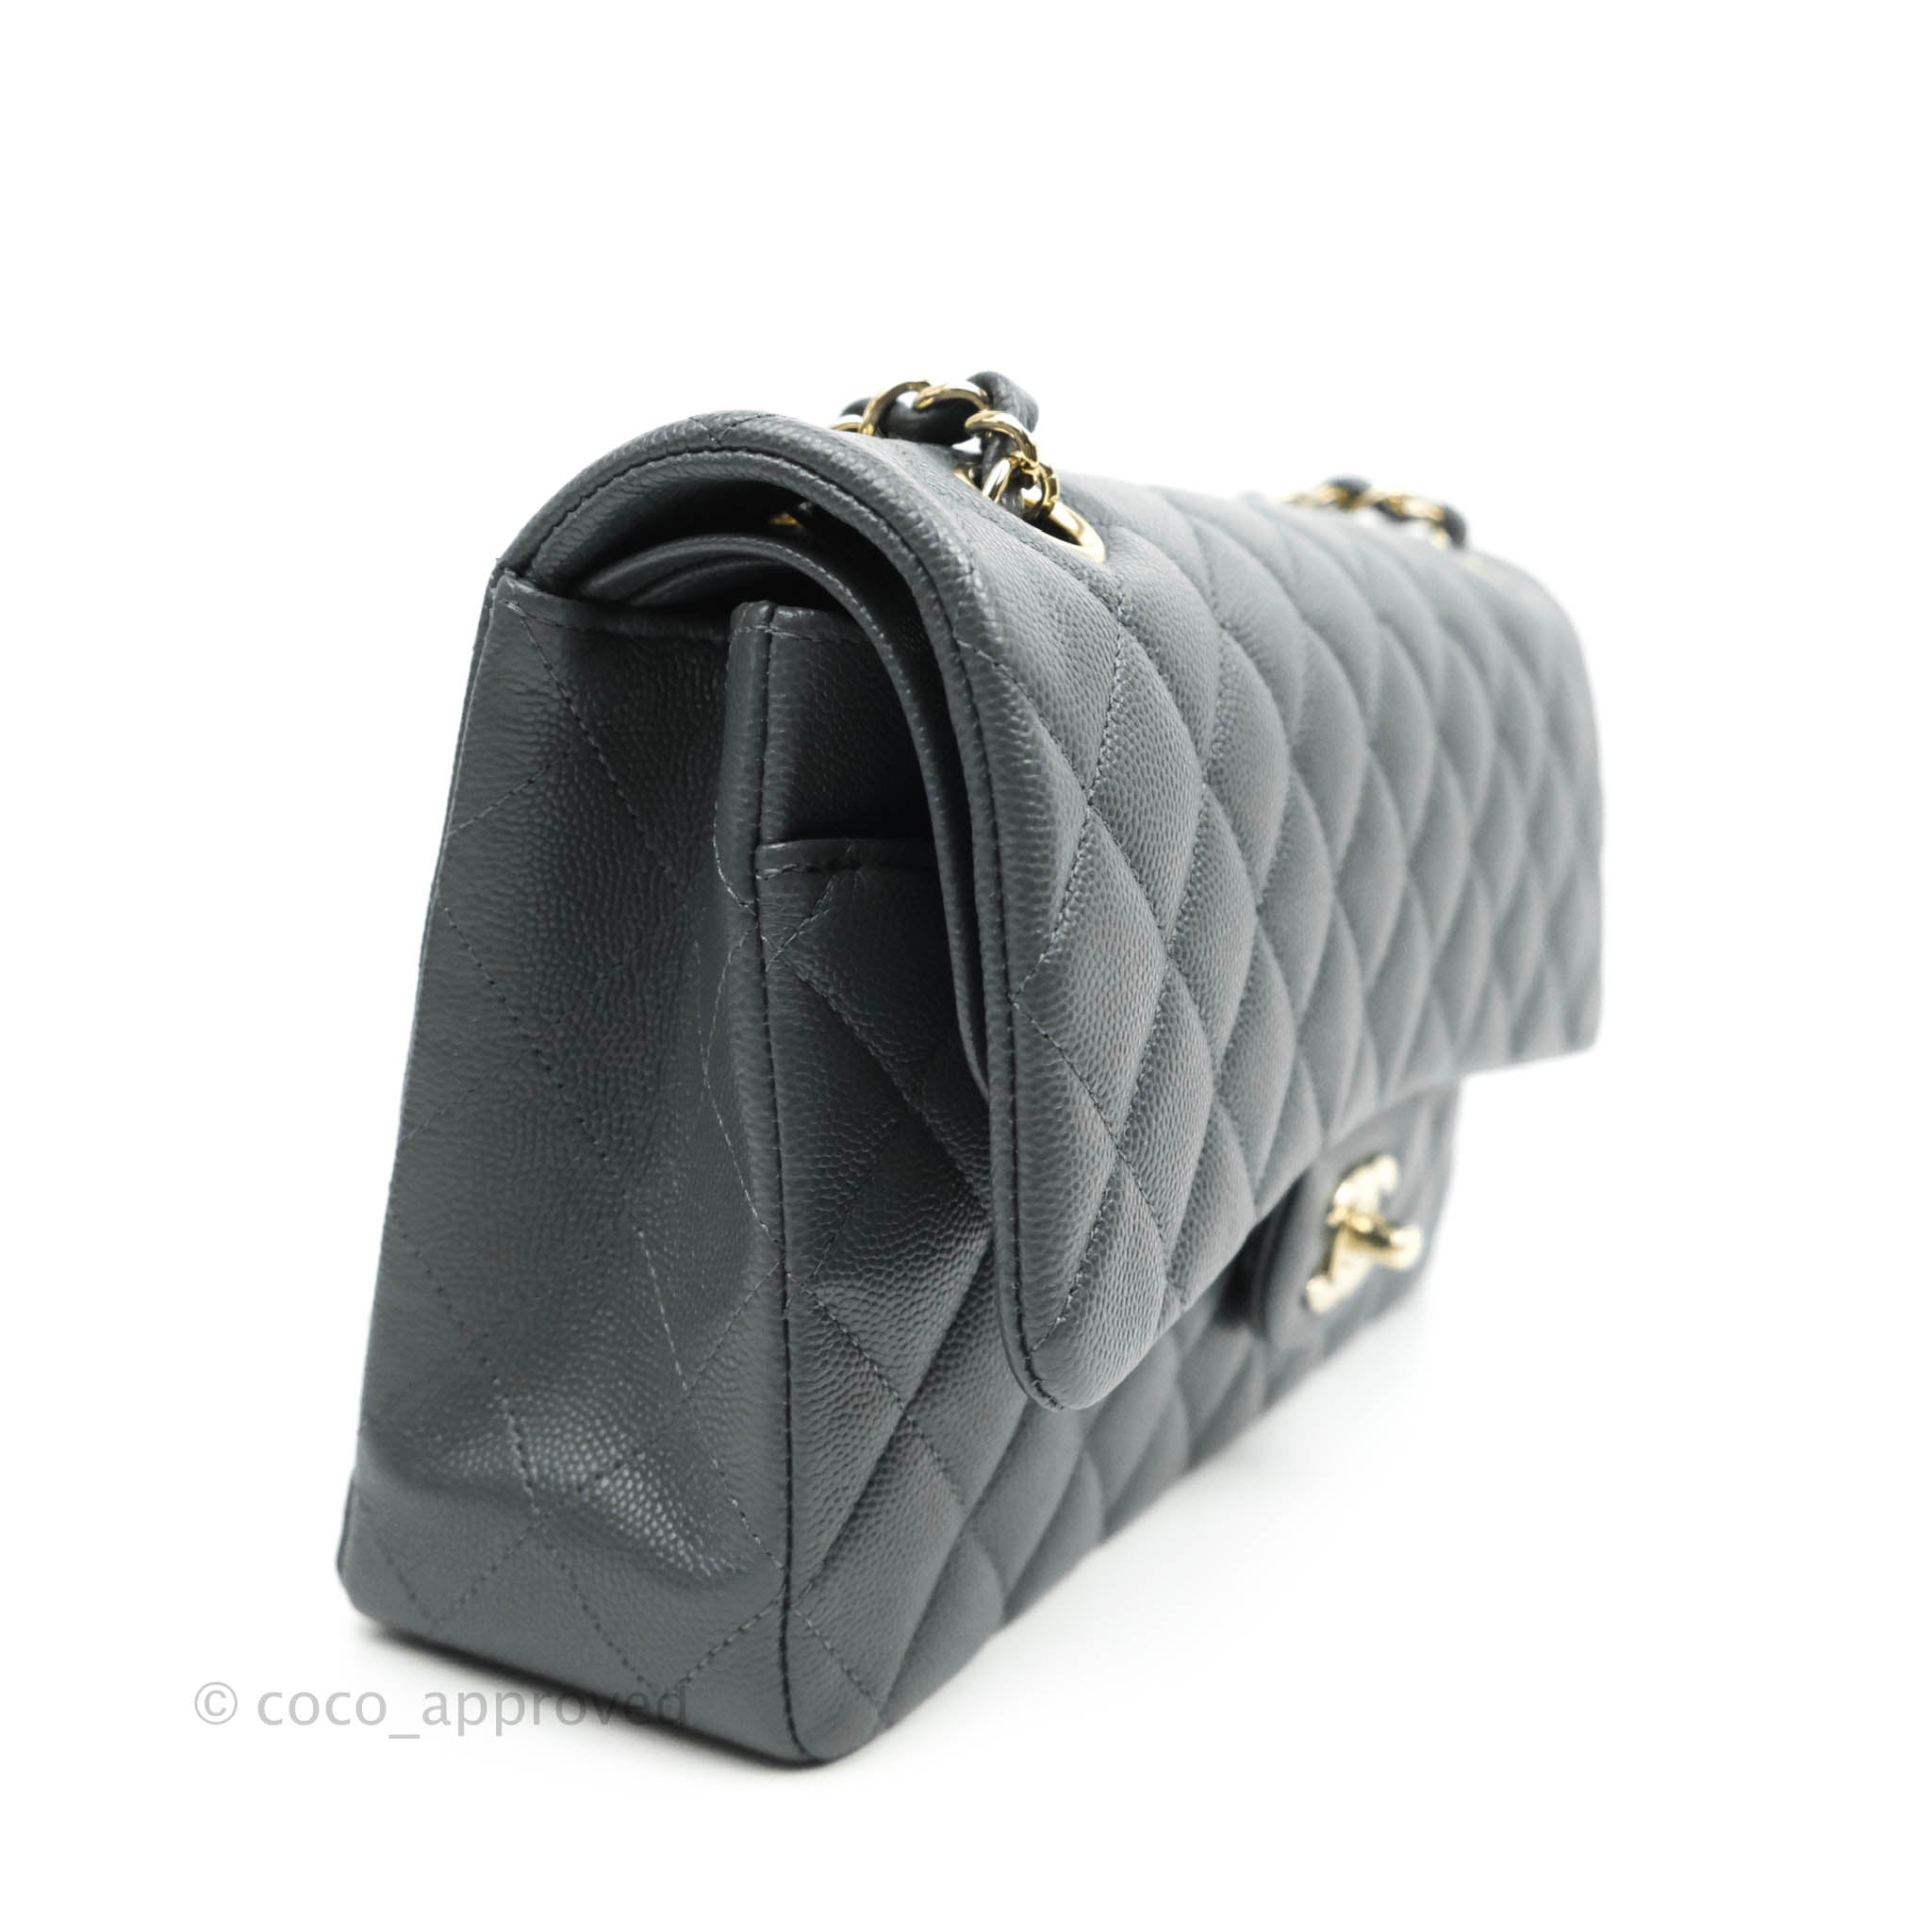 Sold at Auction: Chanel - a classic double flap bag in charcoal